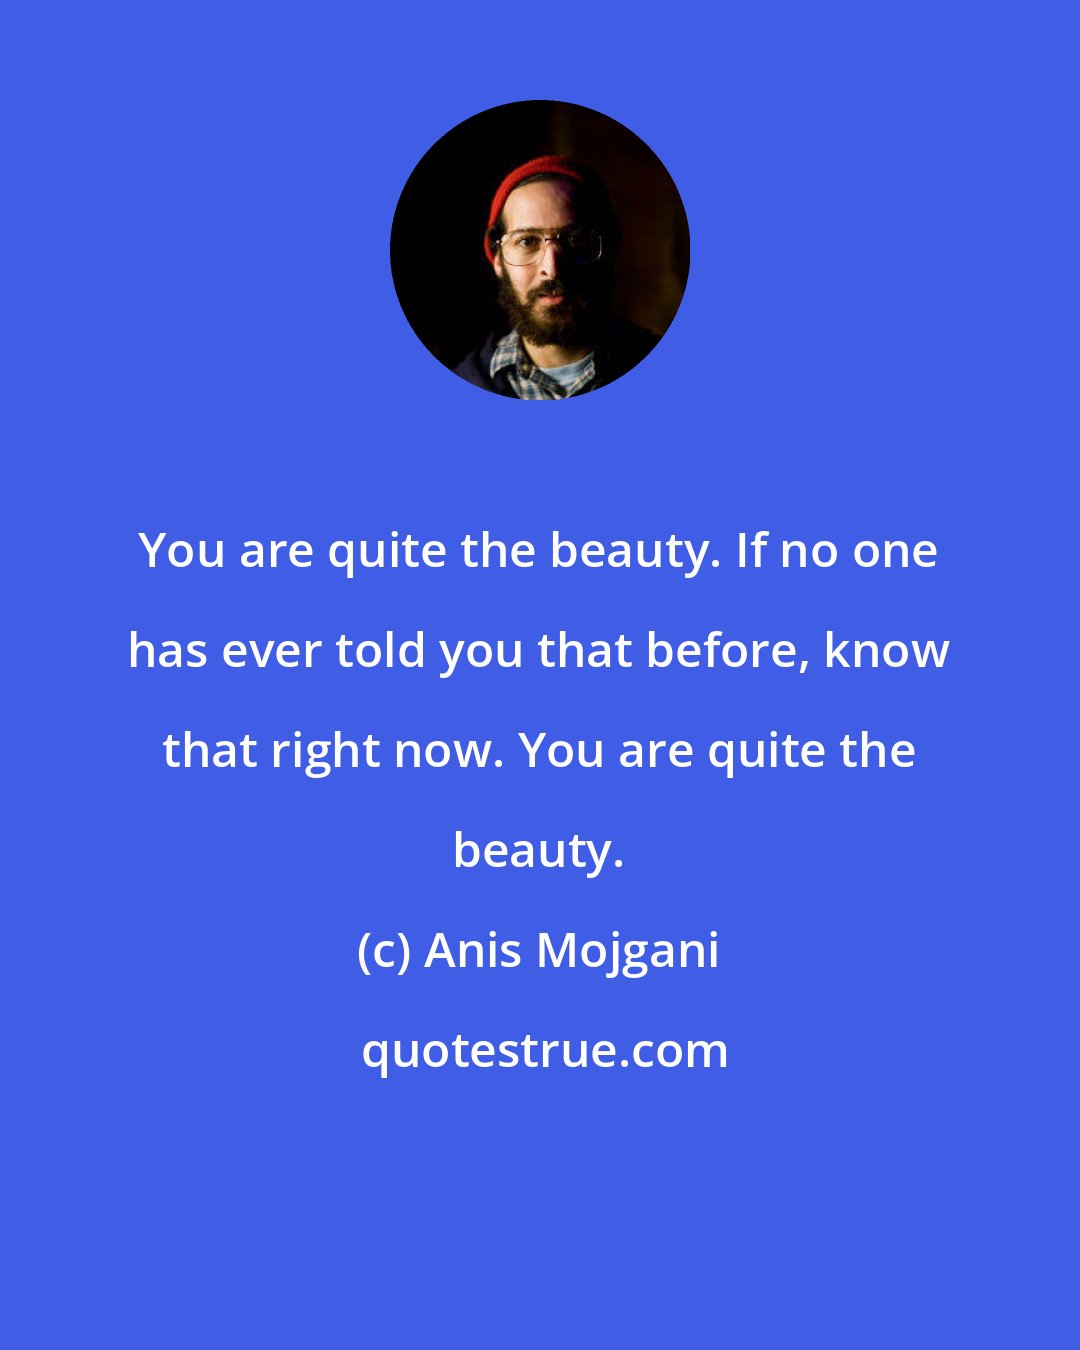 Anis Mojgani: You are quite the beauty. If no one has ever told you that before, know that right now. You are quite the beauty.